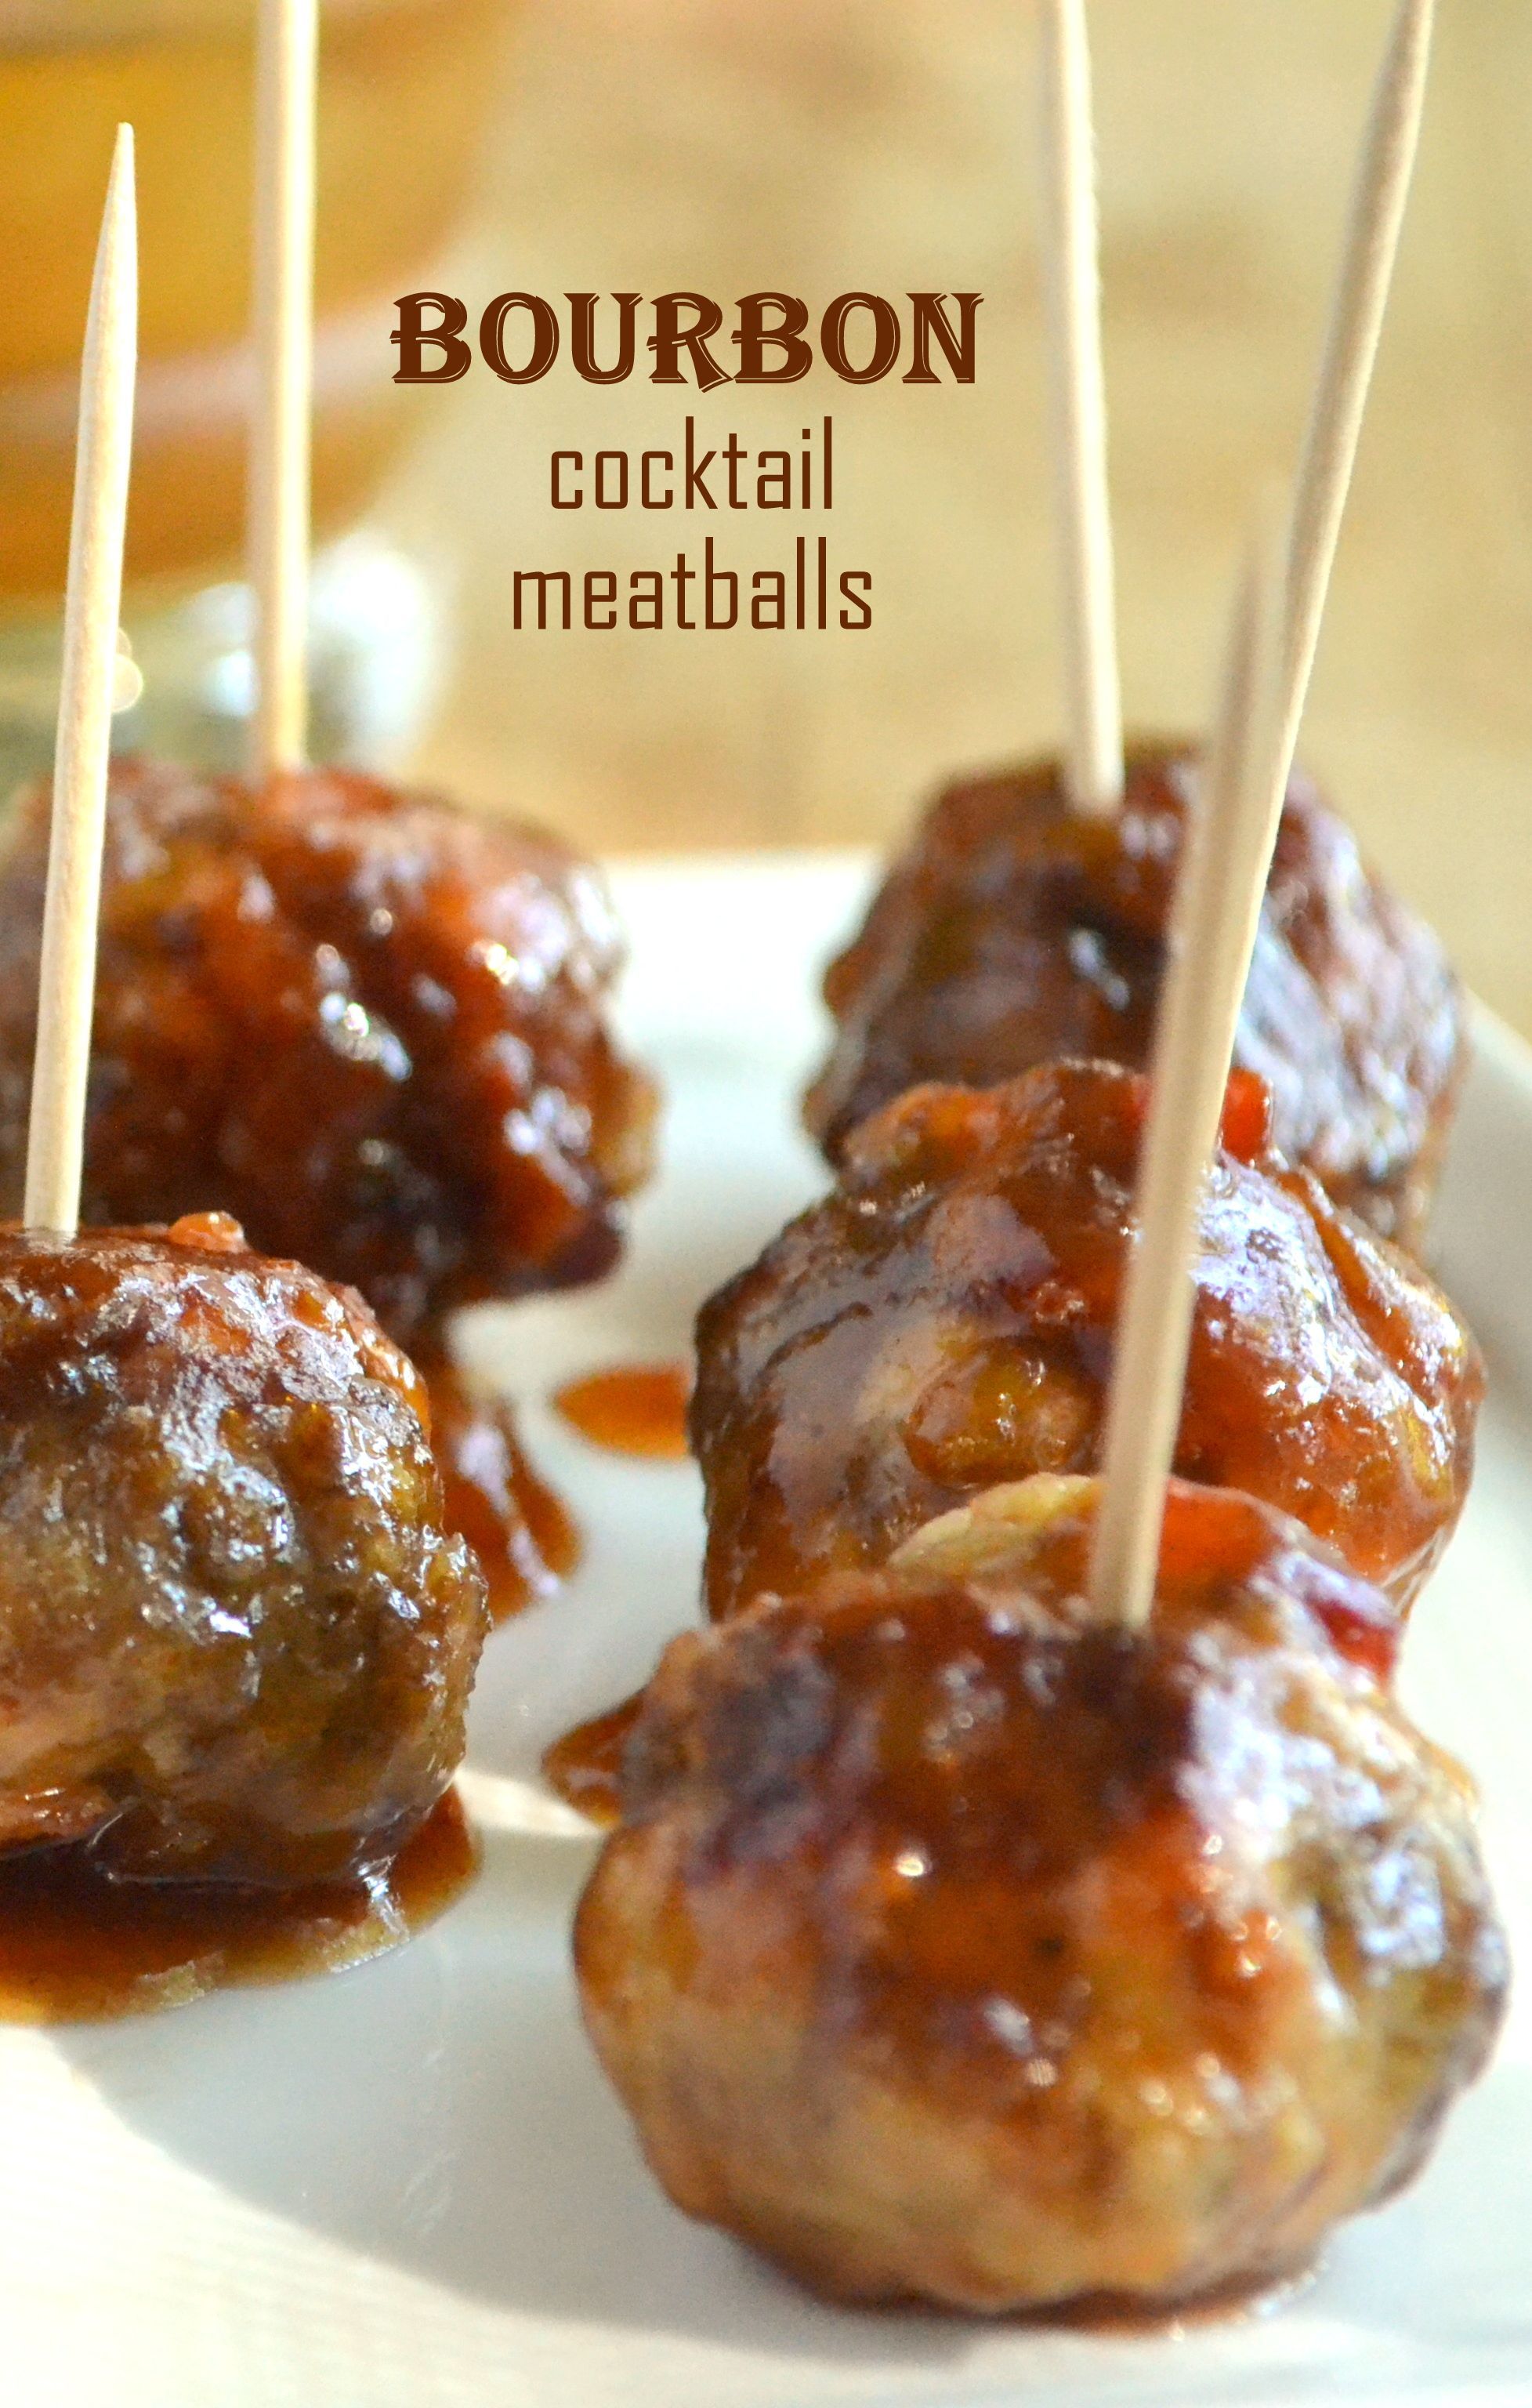 Look no further for the perfect cocktail meatball!